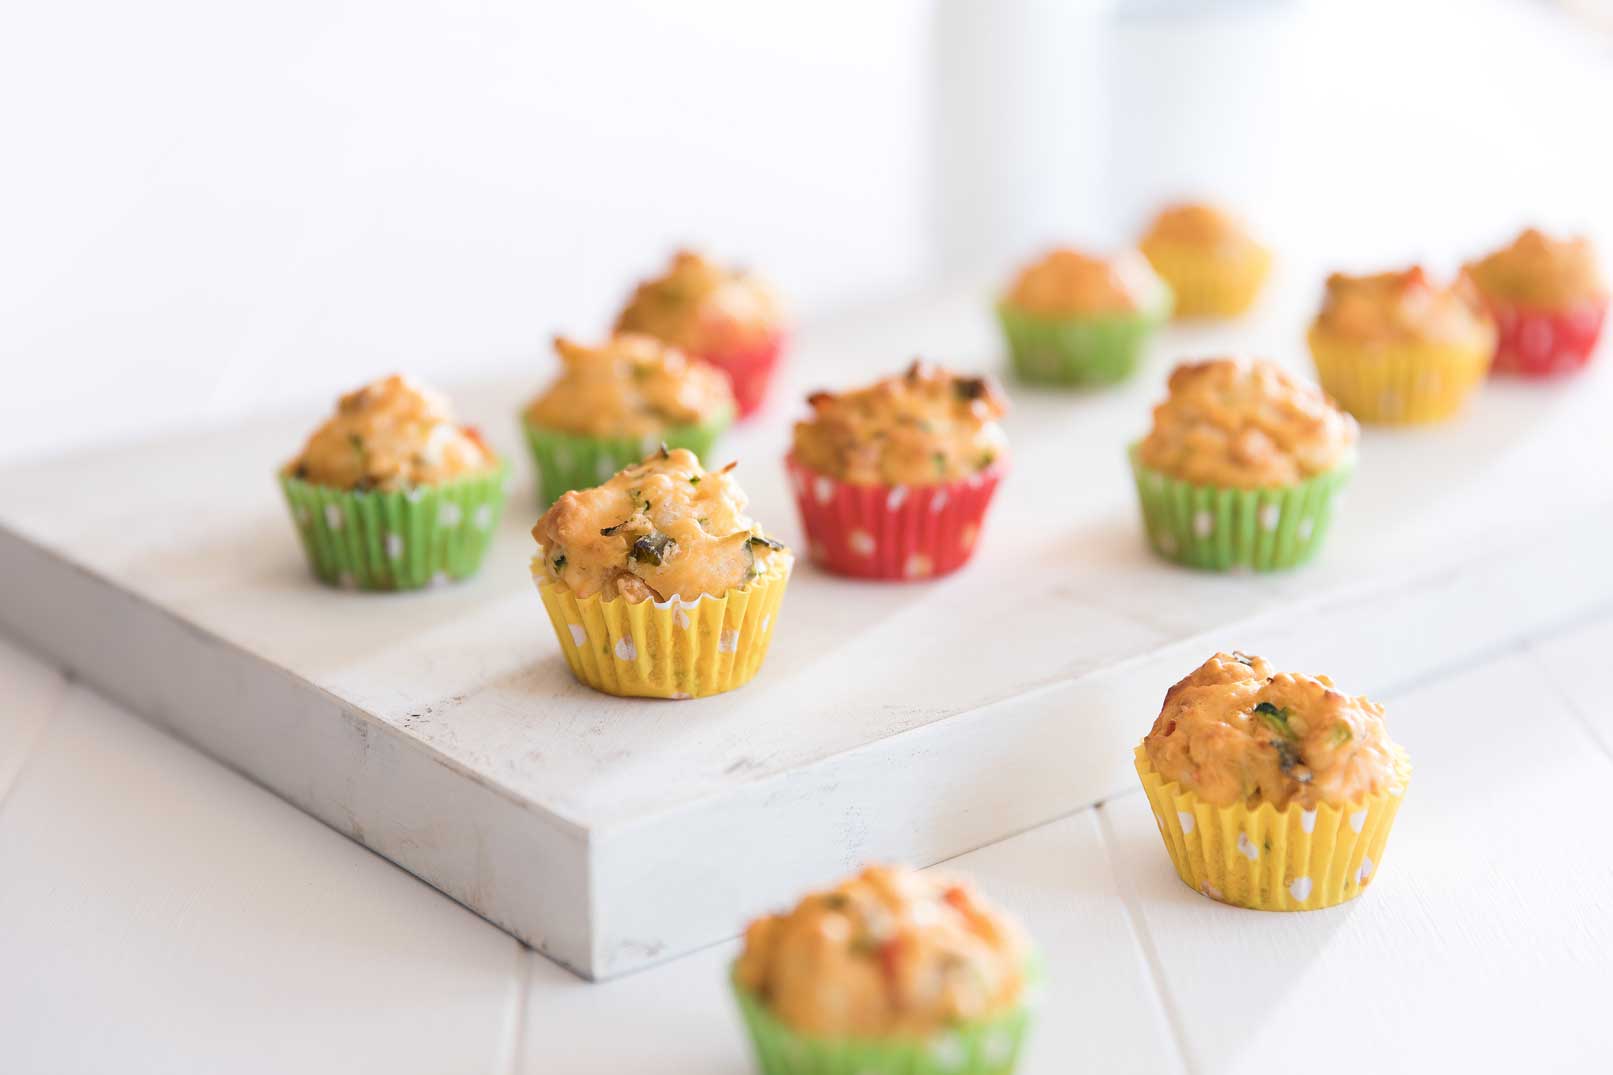 Baked bean mini muffins in yellow, red and green patty cases on a white cutting board.